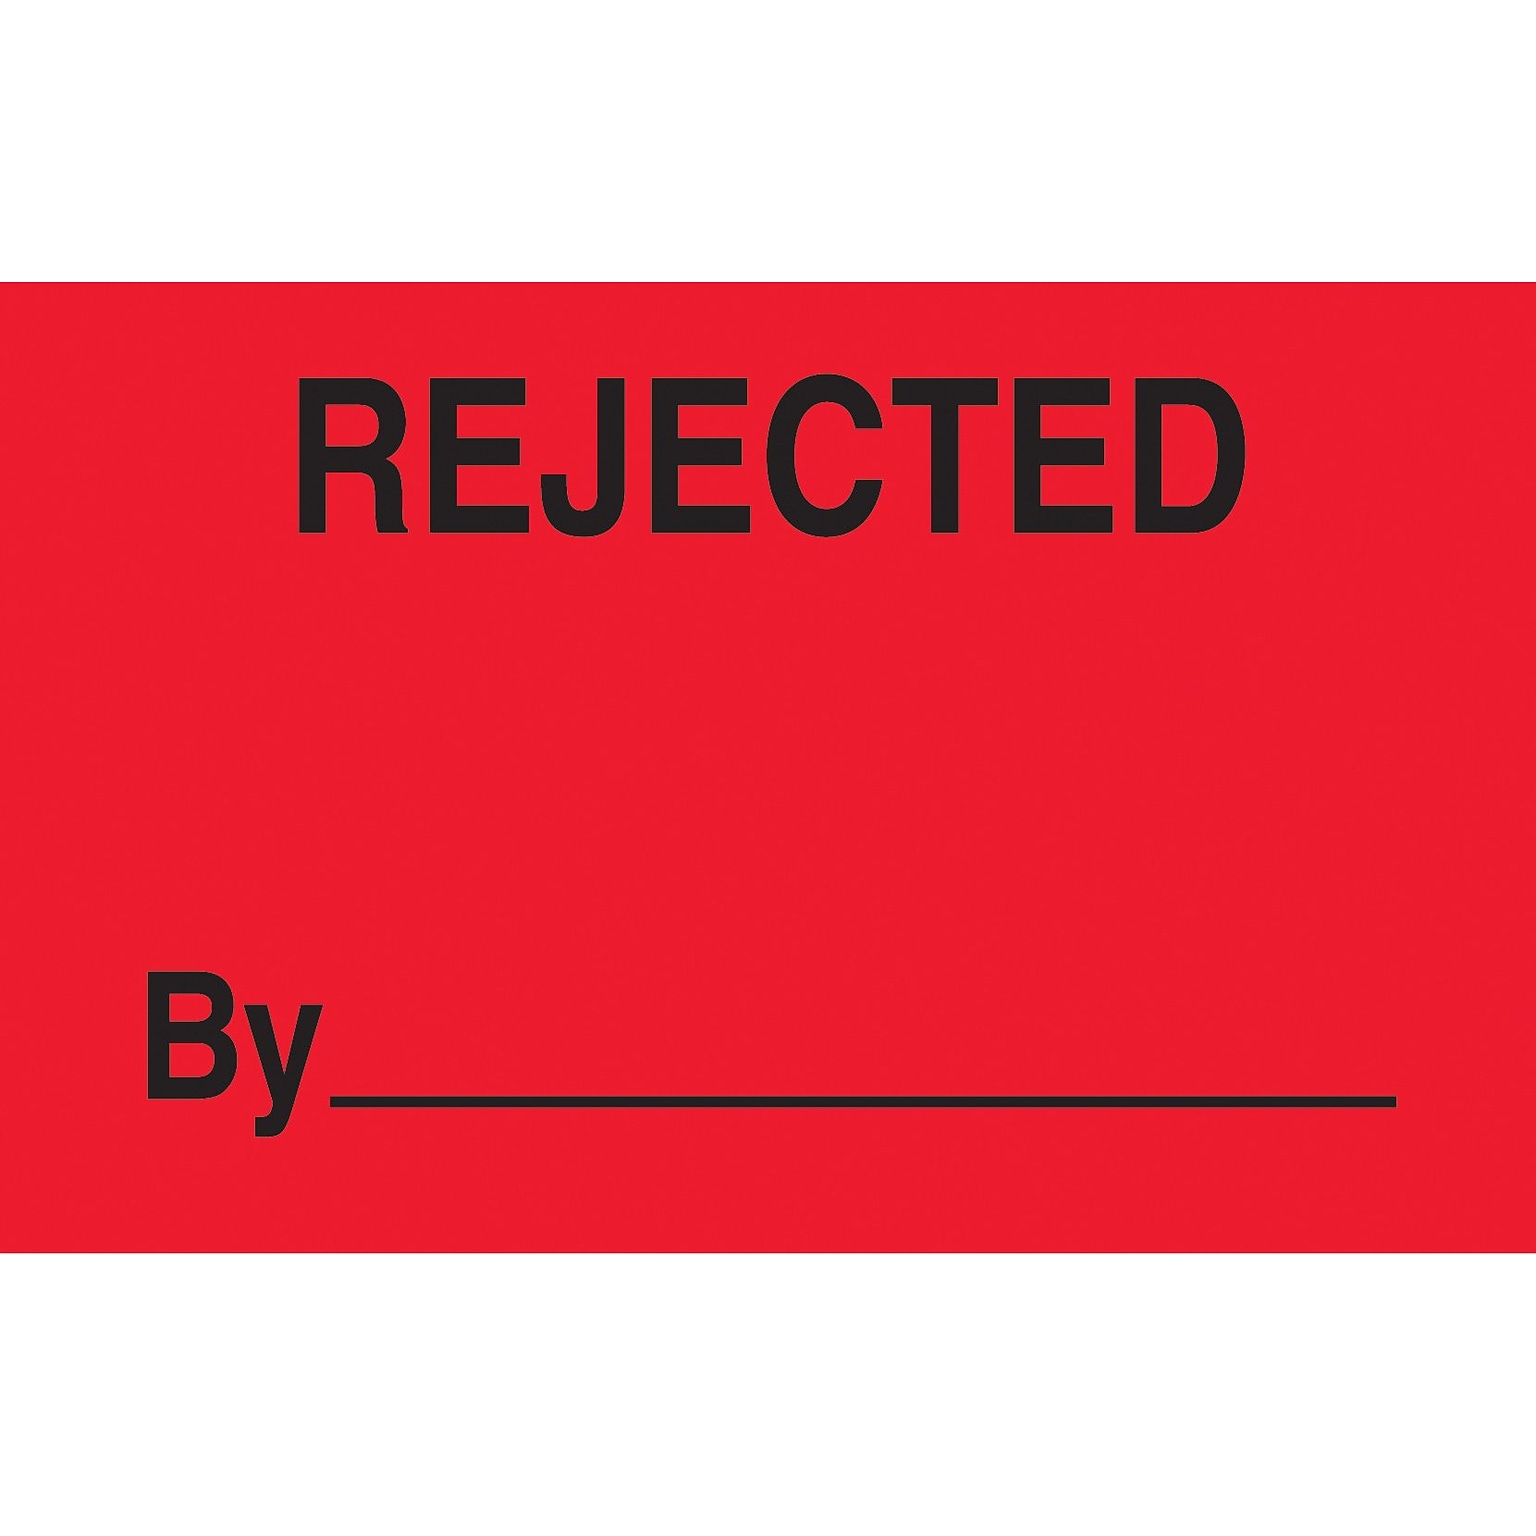 Rejected By ________ Labels, Red/Black, 5 x 3, 500/Rl